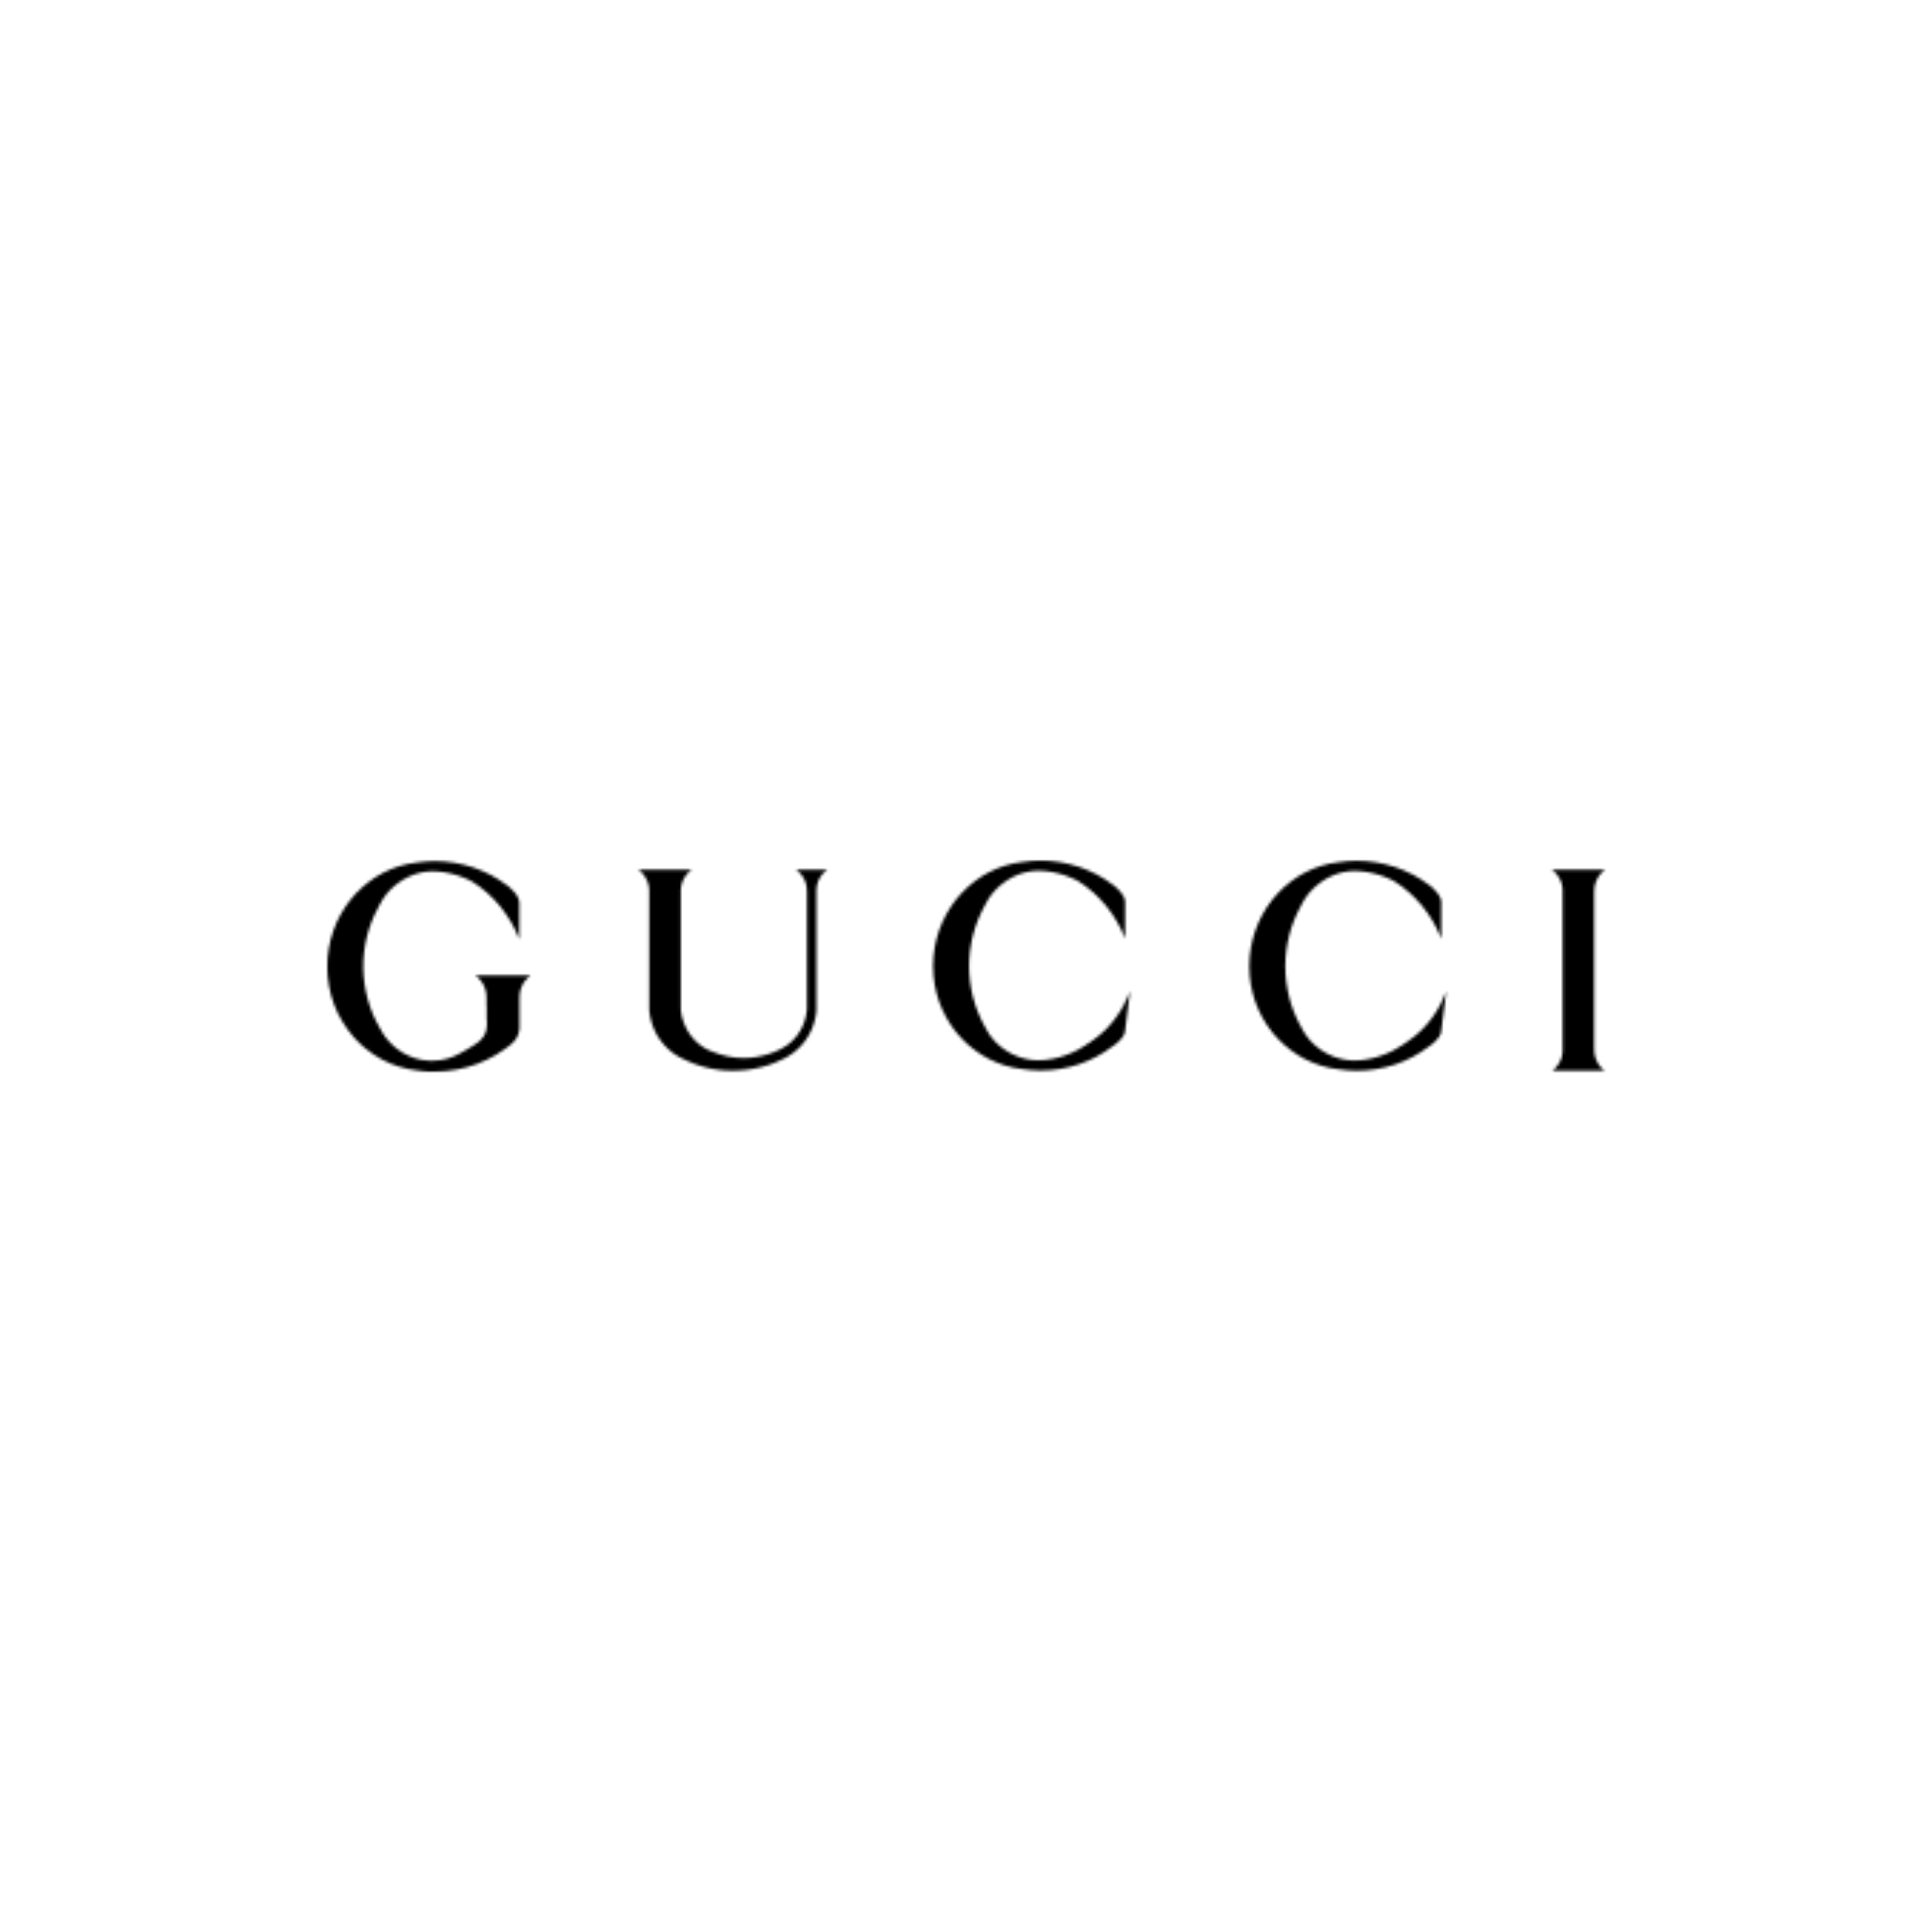 Gucci at Henne Jewelers